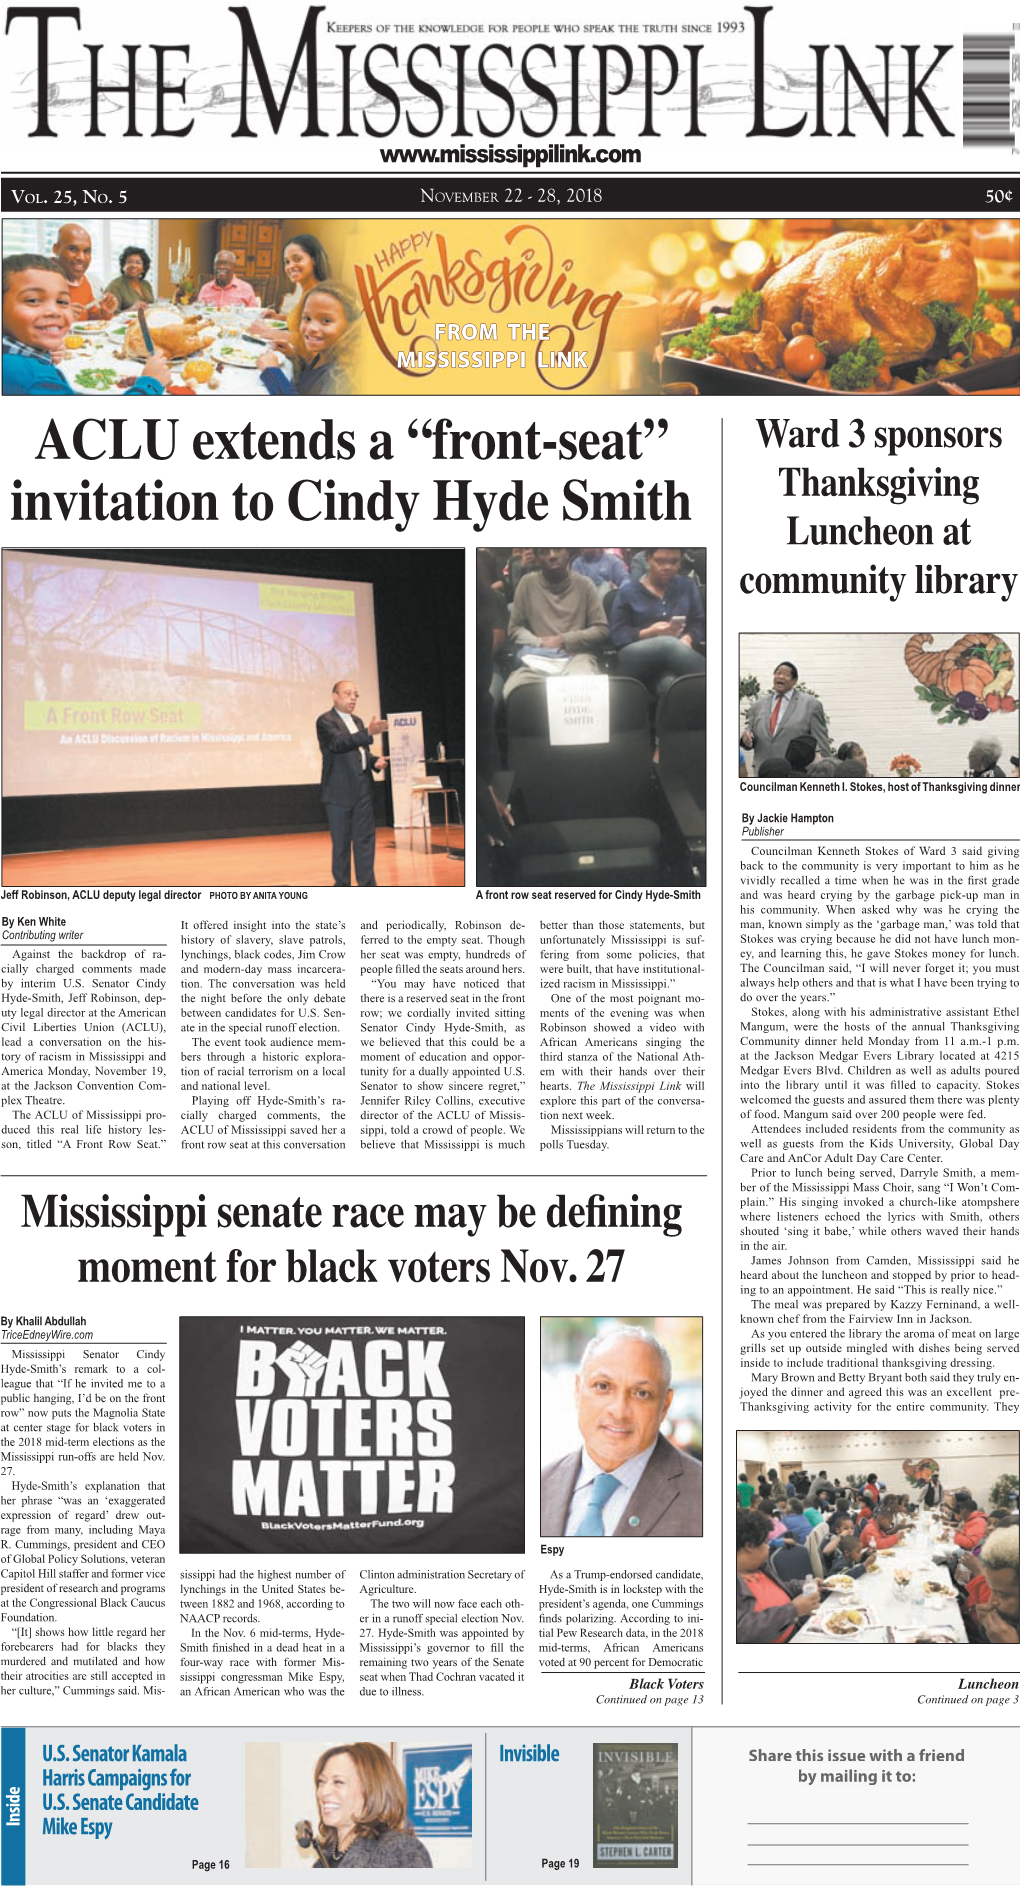 Invitation to Cindy Hyde Smith Luncheon at Community Library